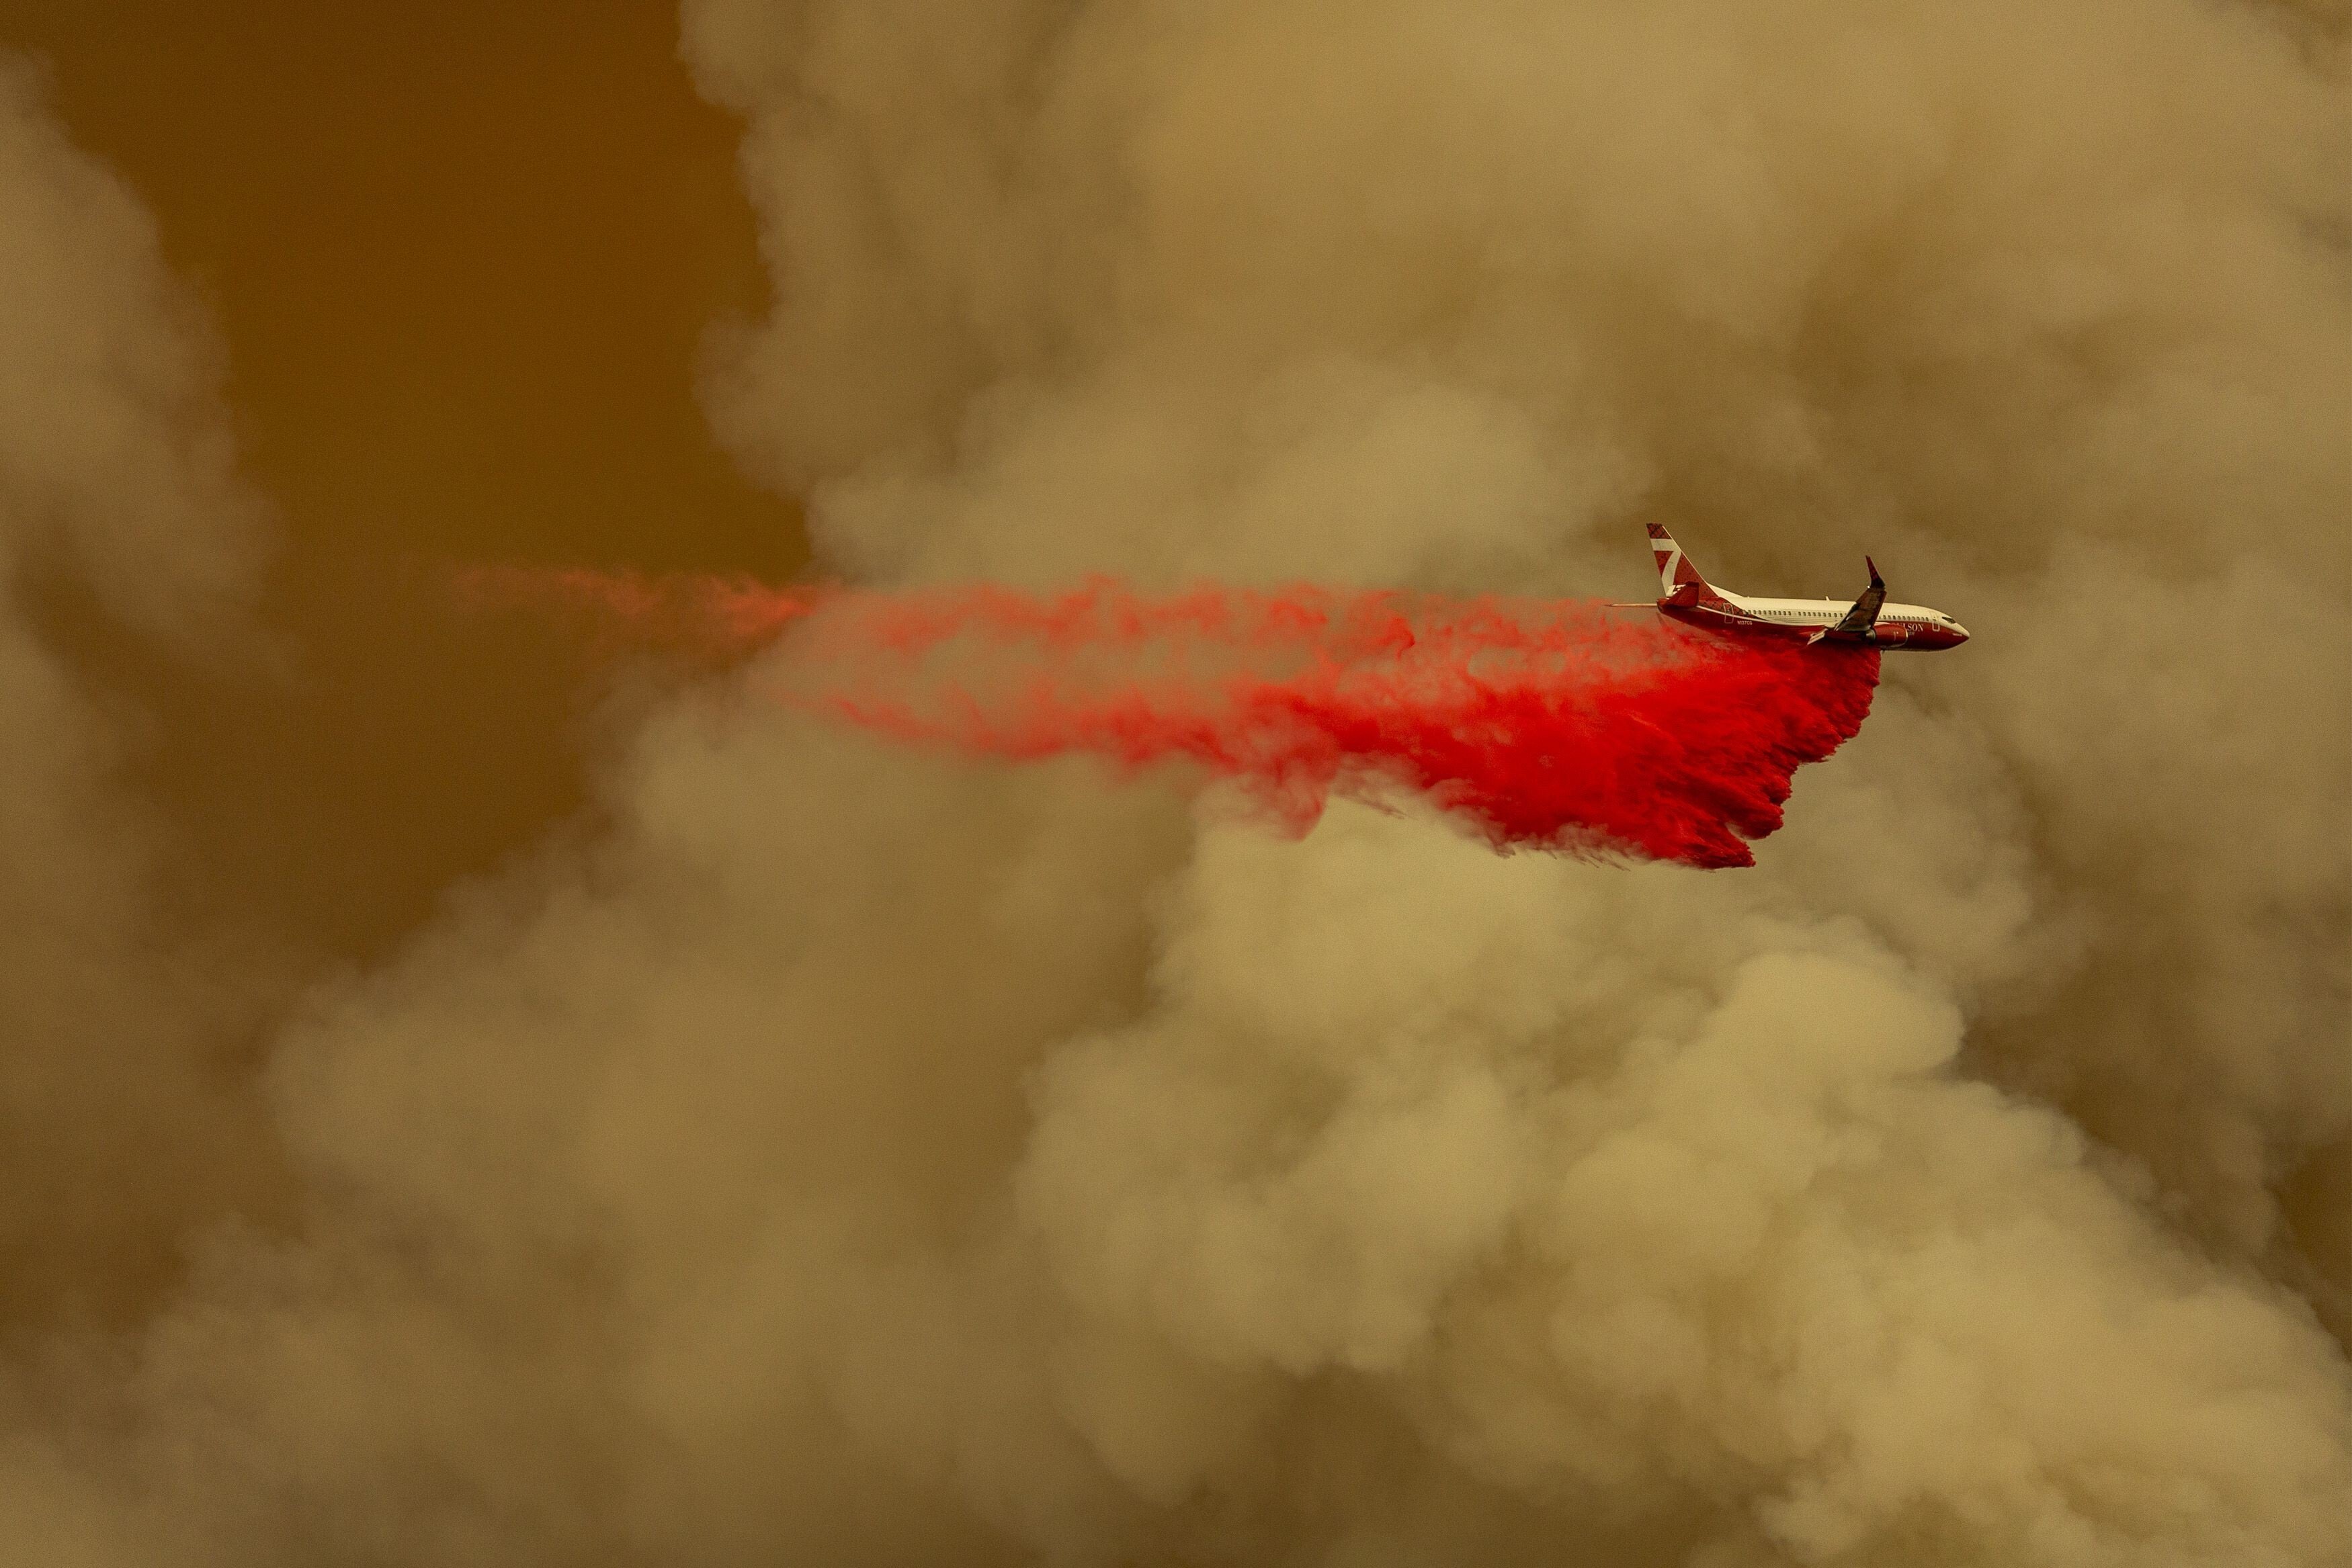 A firefighting tanker jet drops retardant to slow a blaze at the top of a mountainside in the Angeles National Forest on September 10, 2020. Climate change has played a role in the wildfires that have ravaged California in recent years. Photo: Getty Images/AFP